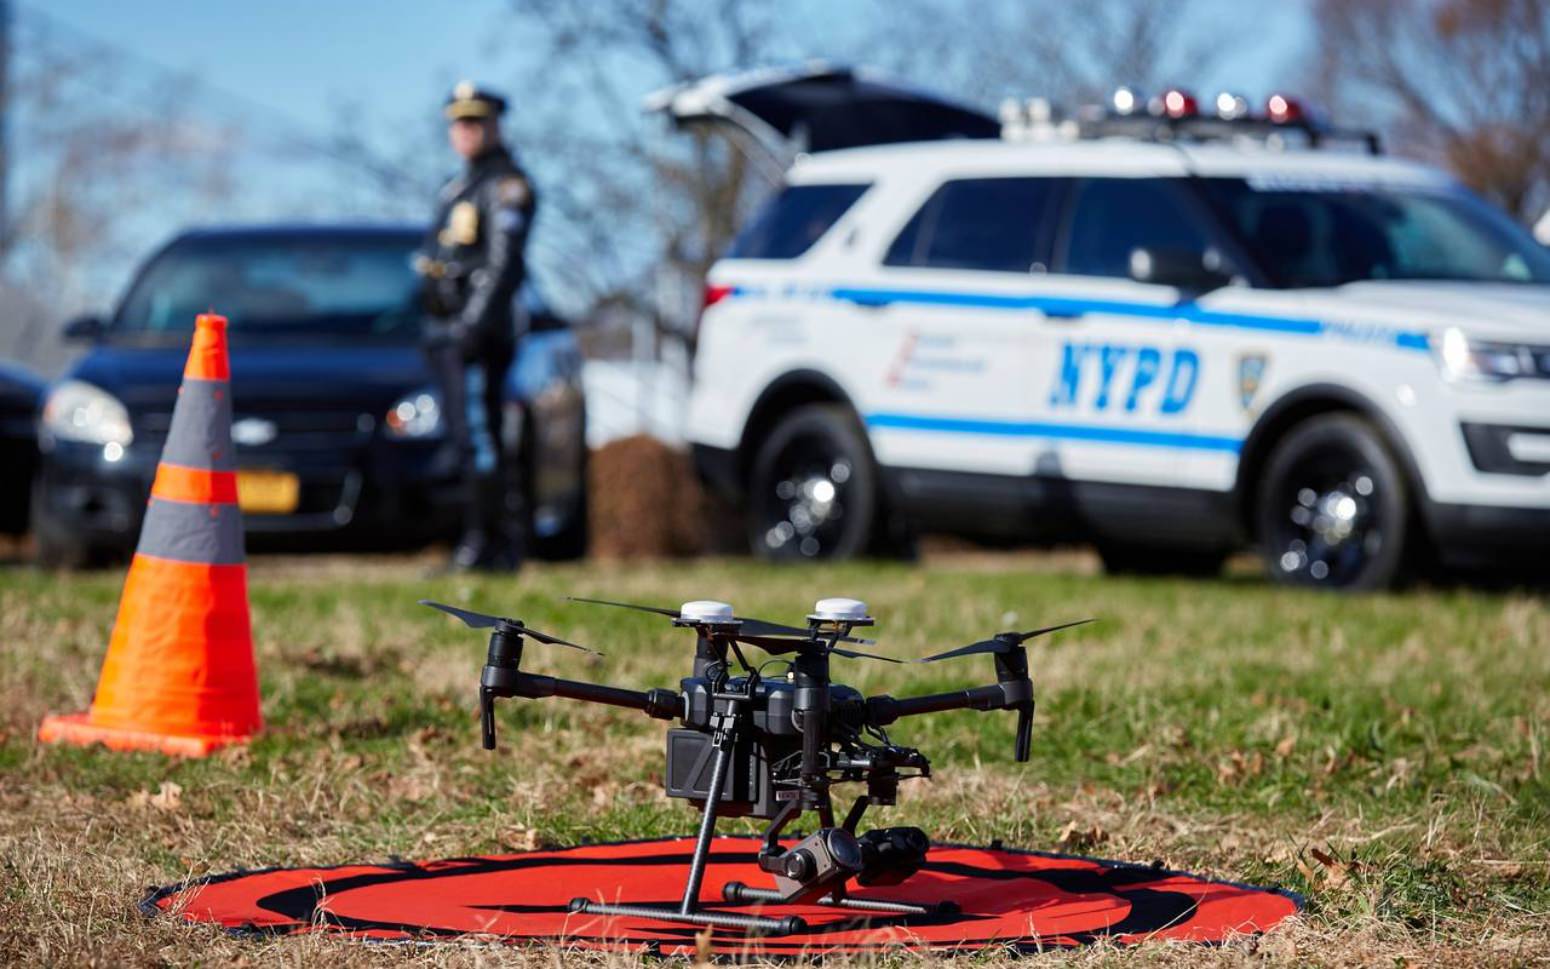 New York Police Department wants authority to take down drones